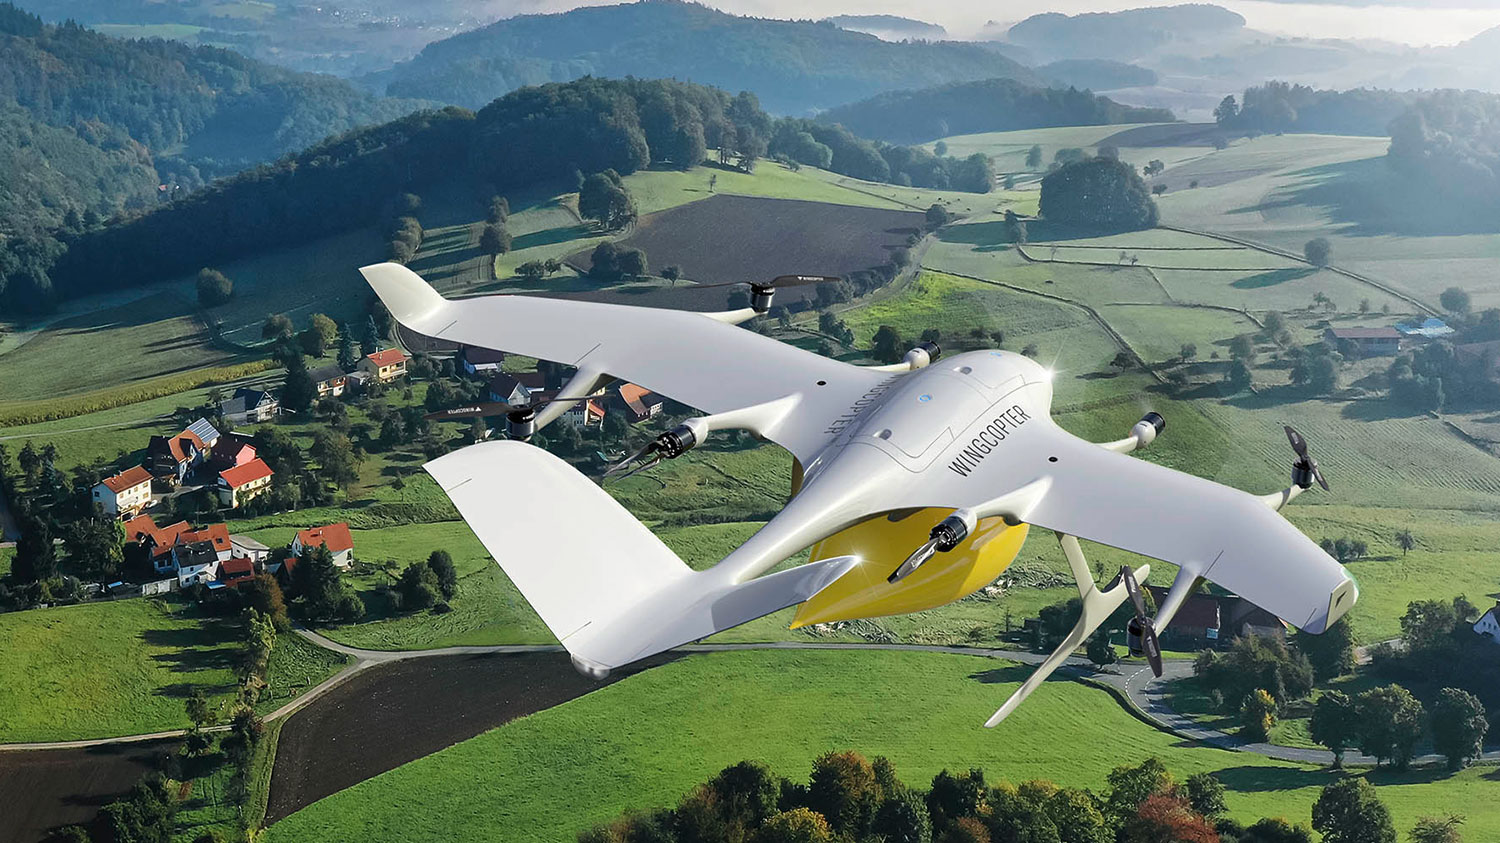 Wingcopter drones deliver everyday goods for the first time in Germany.